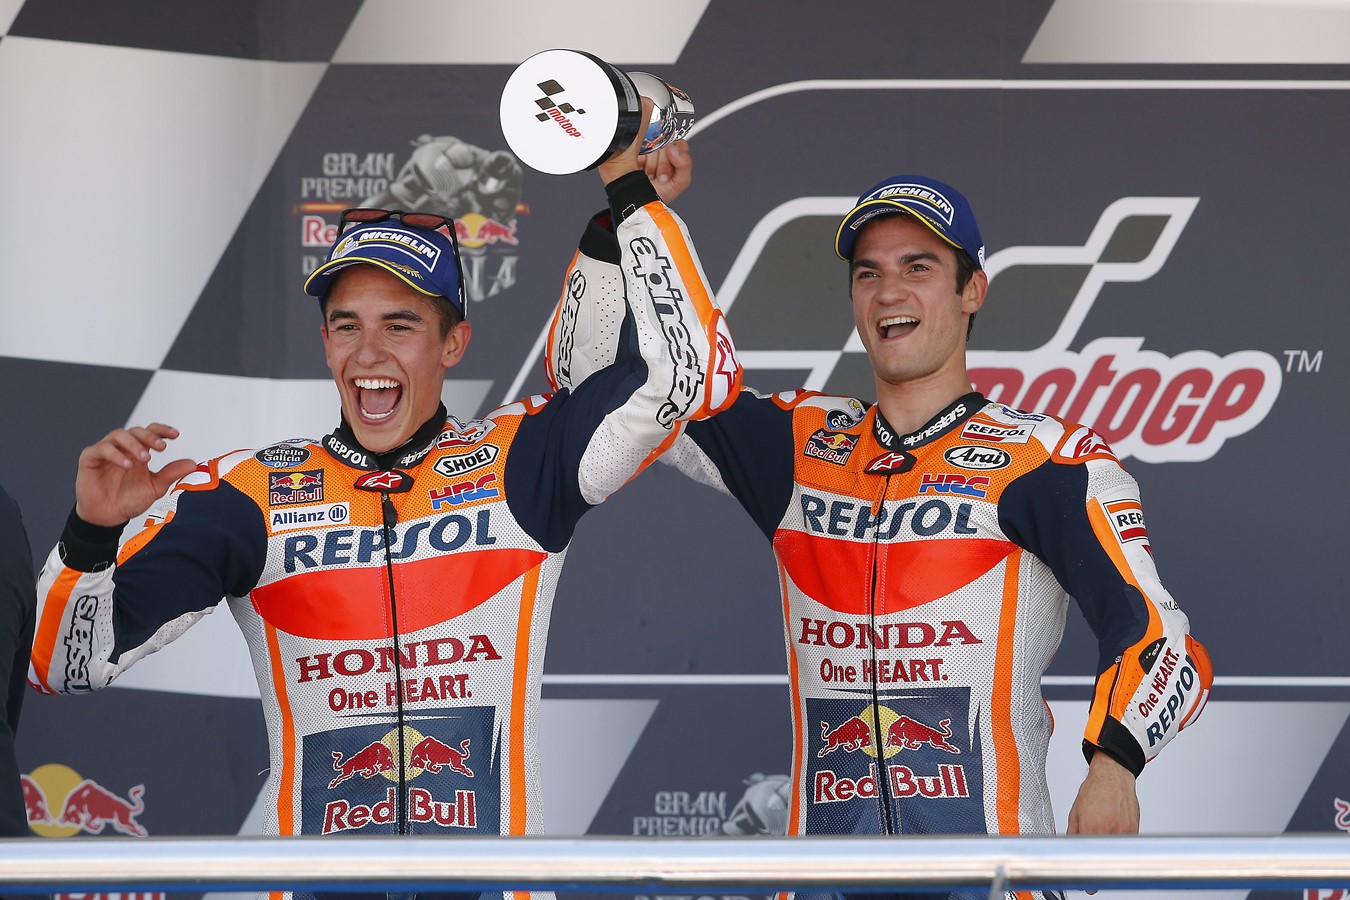 Pedrosa Wins Repsol Honda’s 100th MotoGP Race, Chased by Marquez